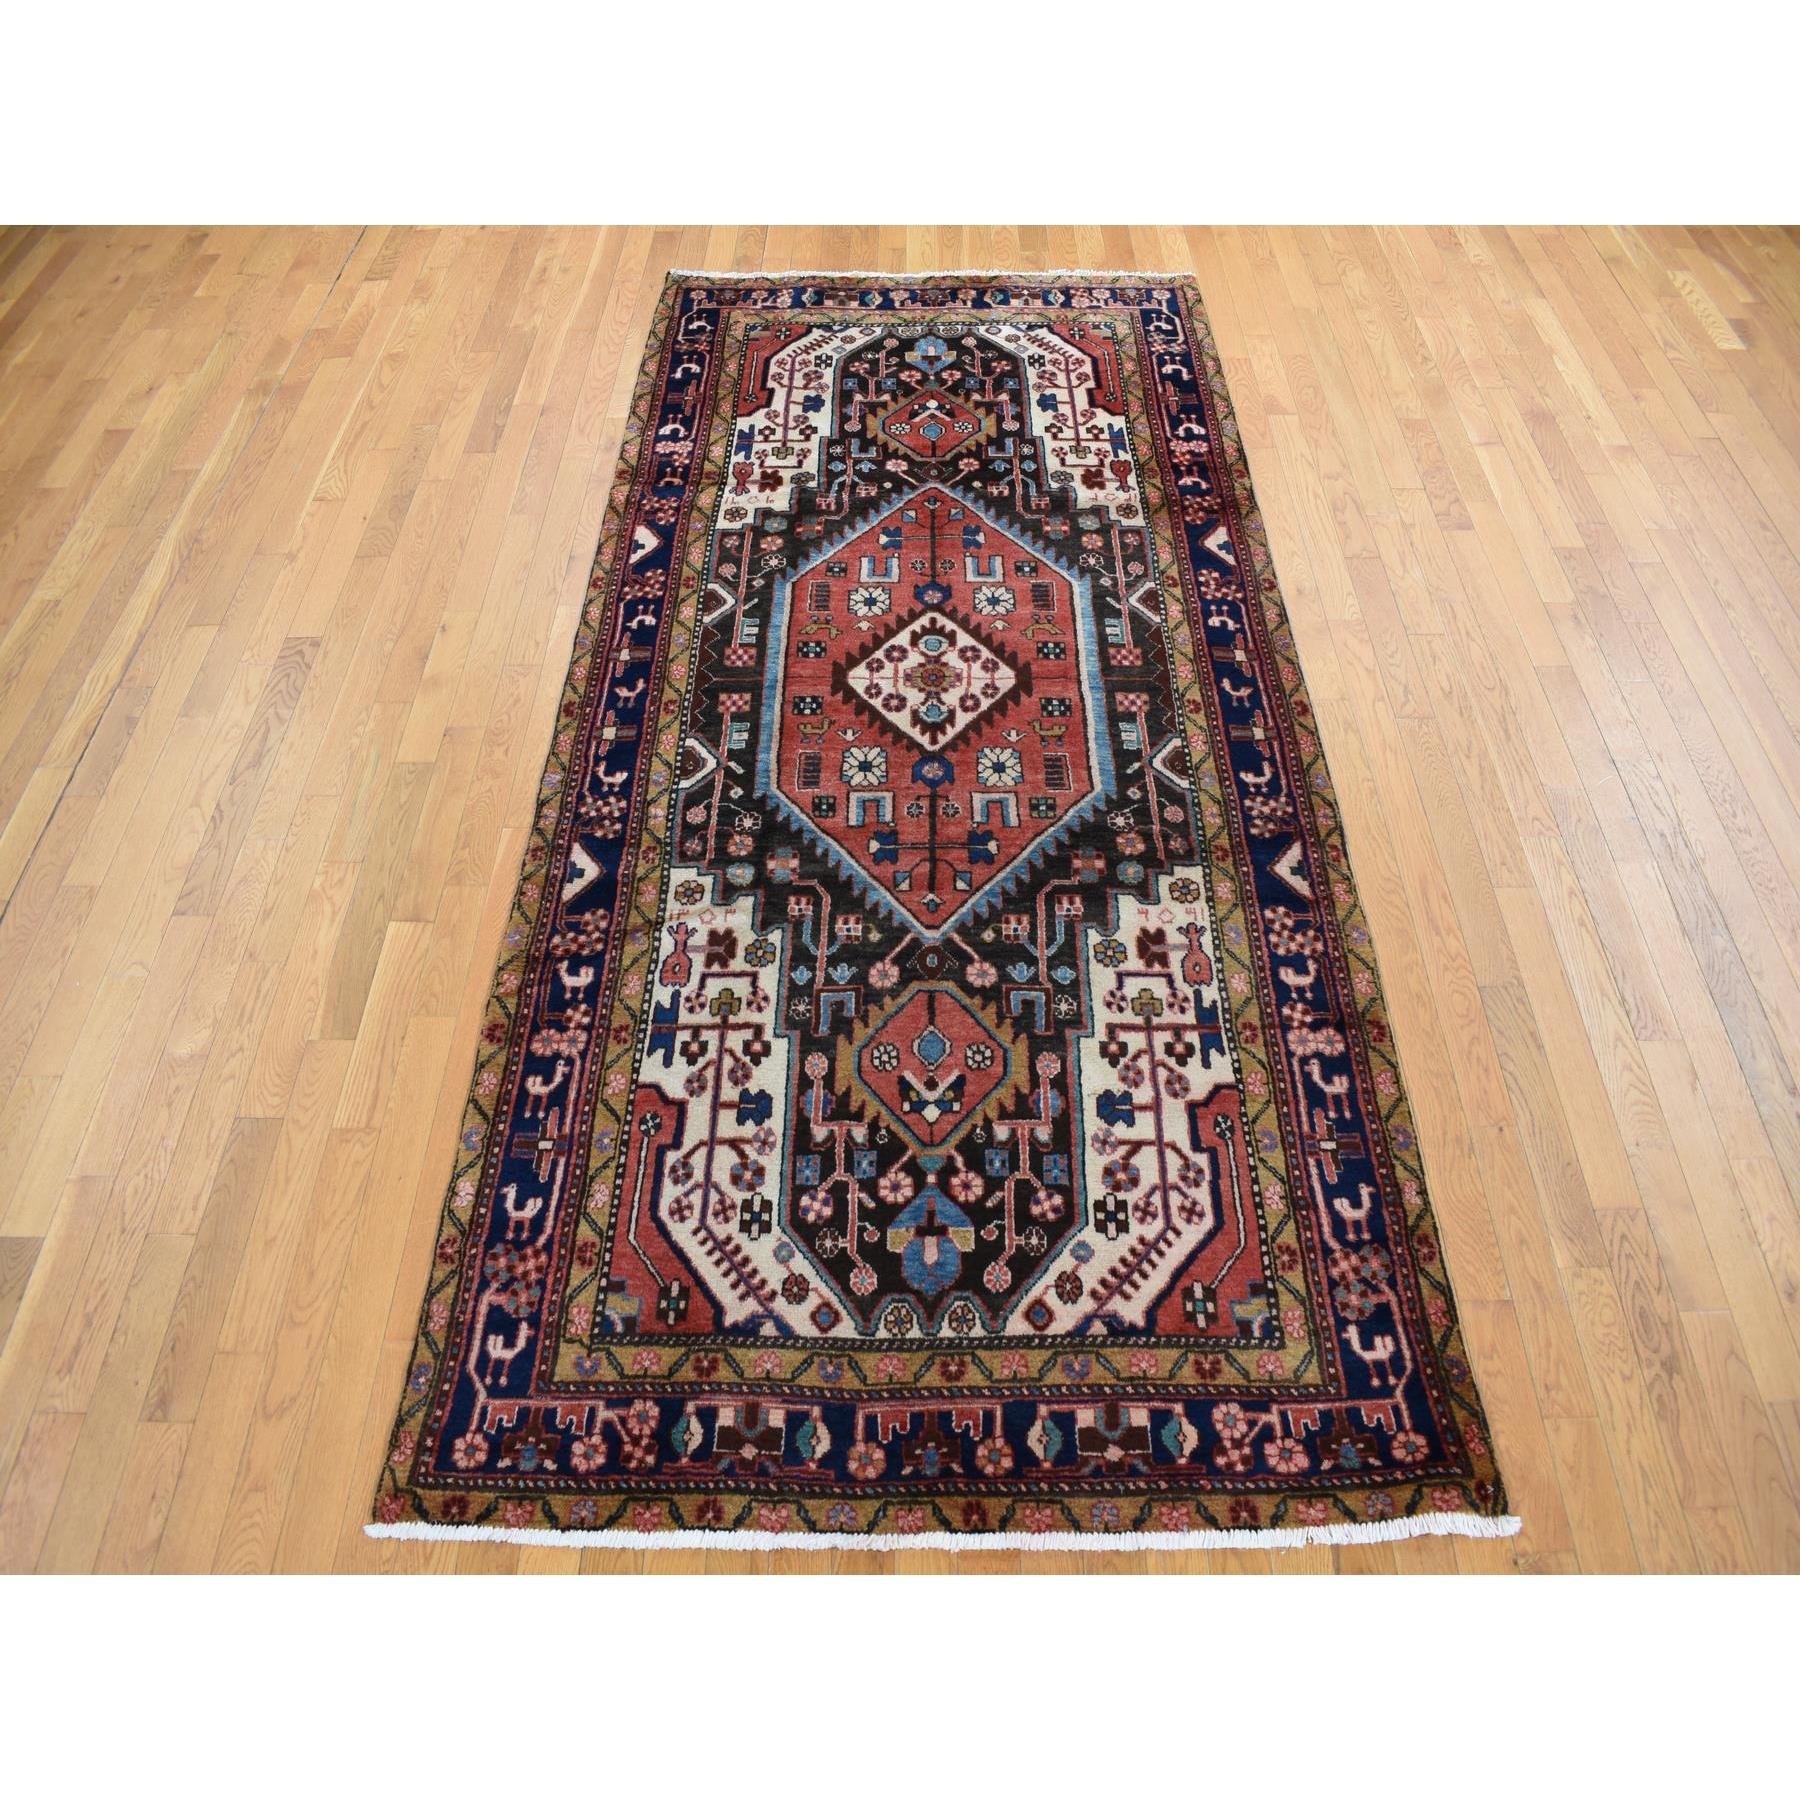 This fabulous Hand-Knotted carpet has been created and designed for extra strength and durability. This rug has been handcrafted for weeks in the traditional method that is used to make
Exact Rug Size in Feet and Inches : 5' x 10'3